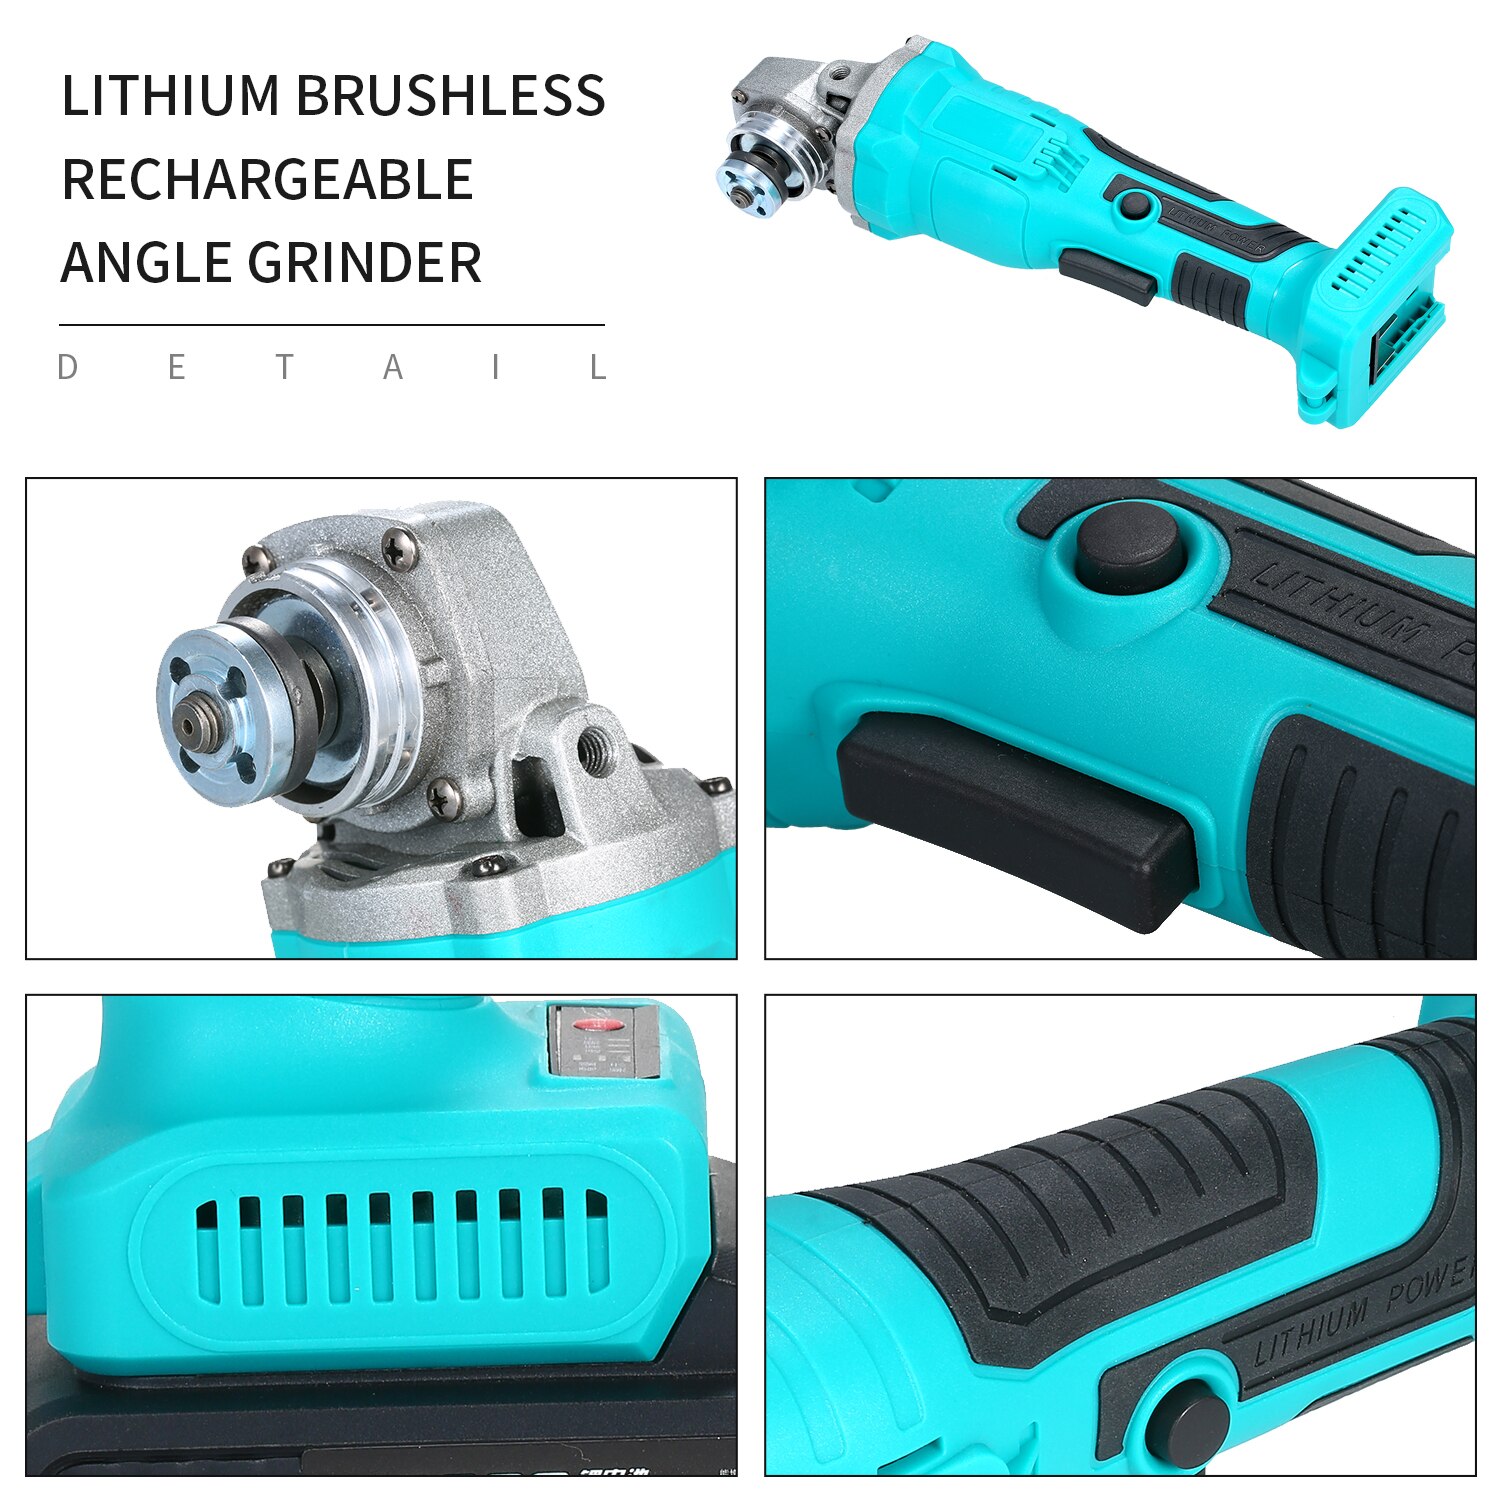 Angle Grinder Lithium Electric Brushless Rechargeable Electric Angle Grinder Household Polishing Machine Angular Grinder